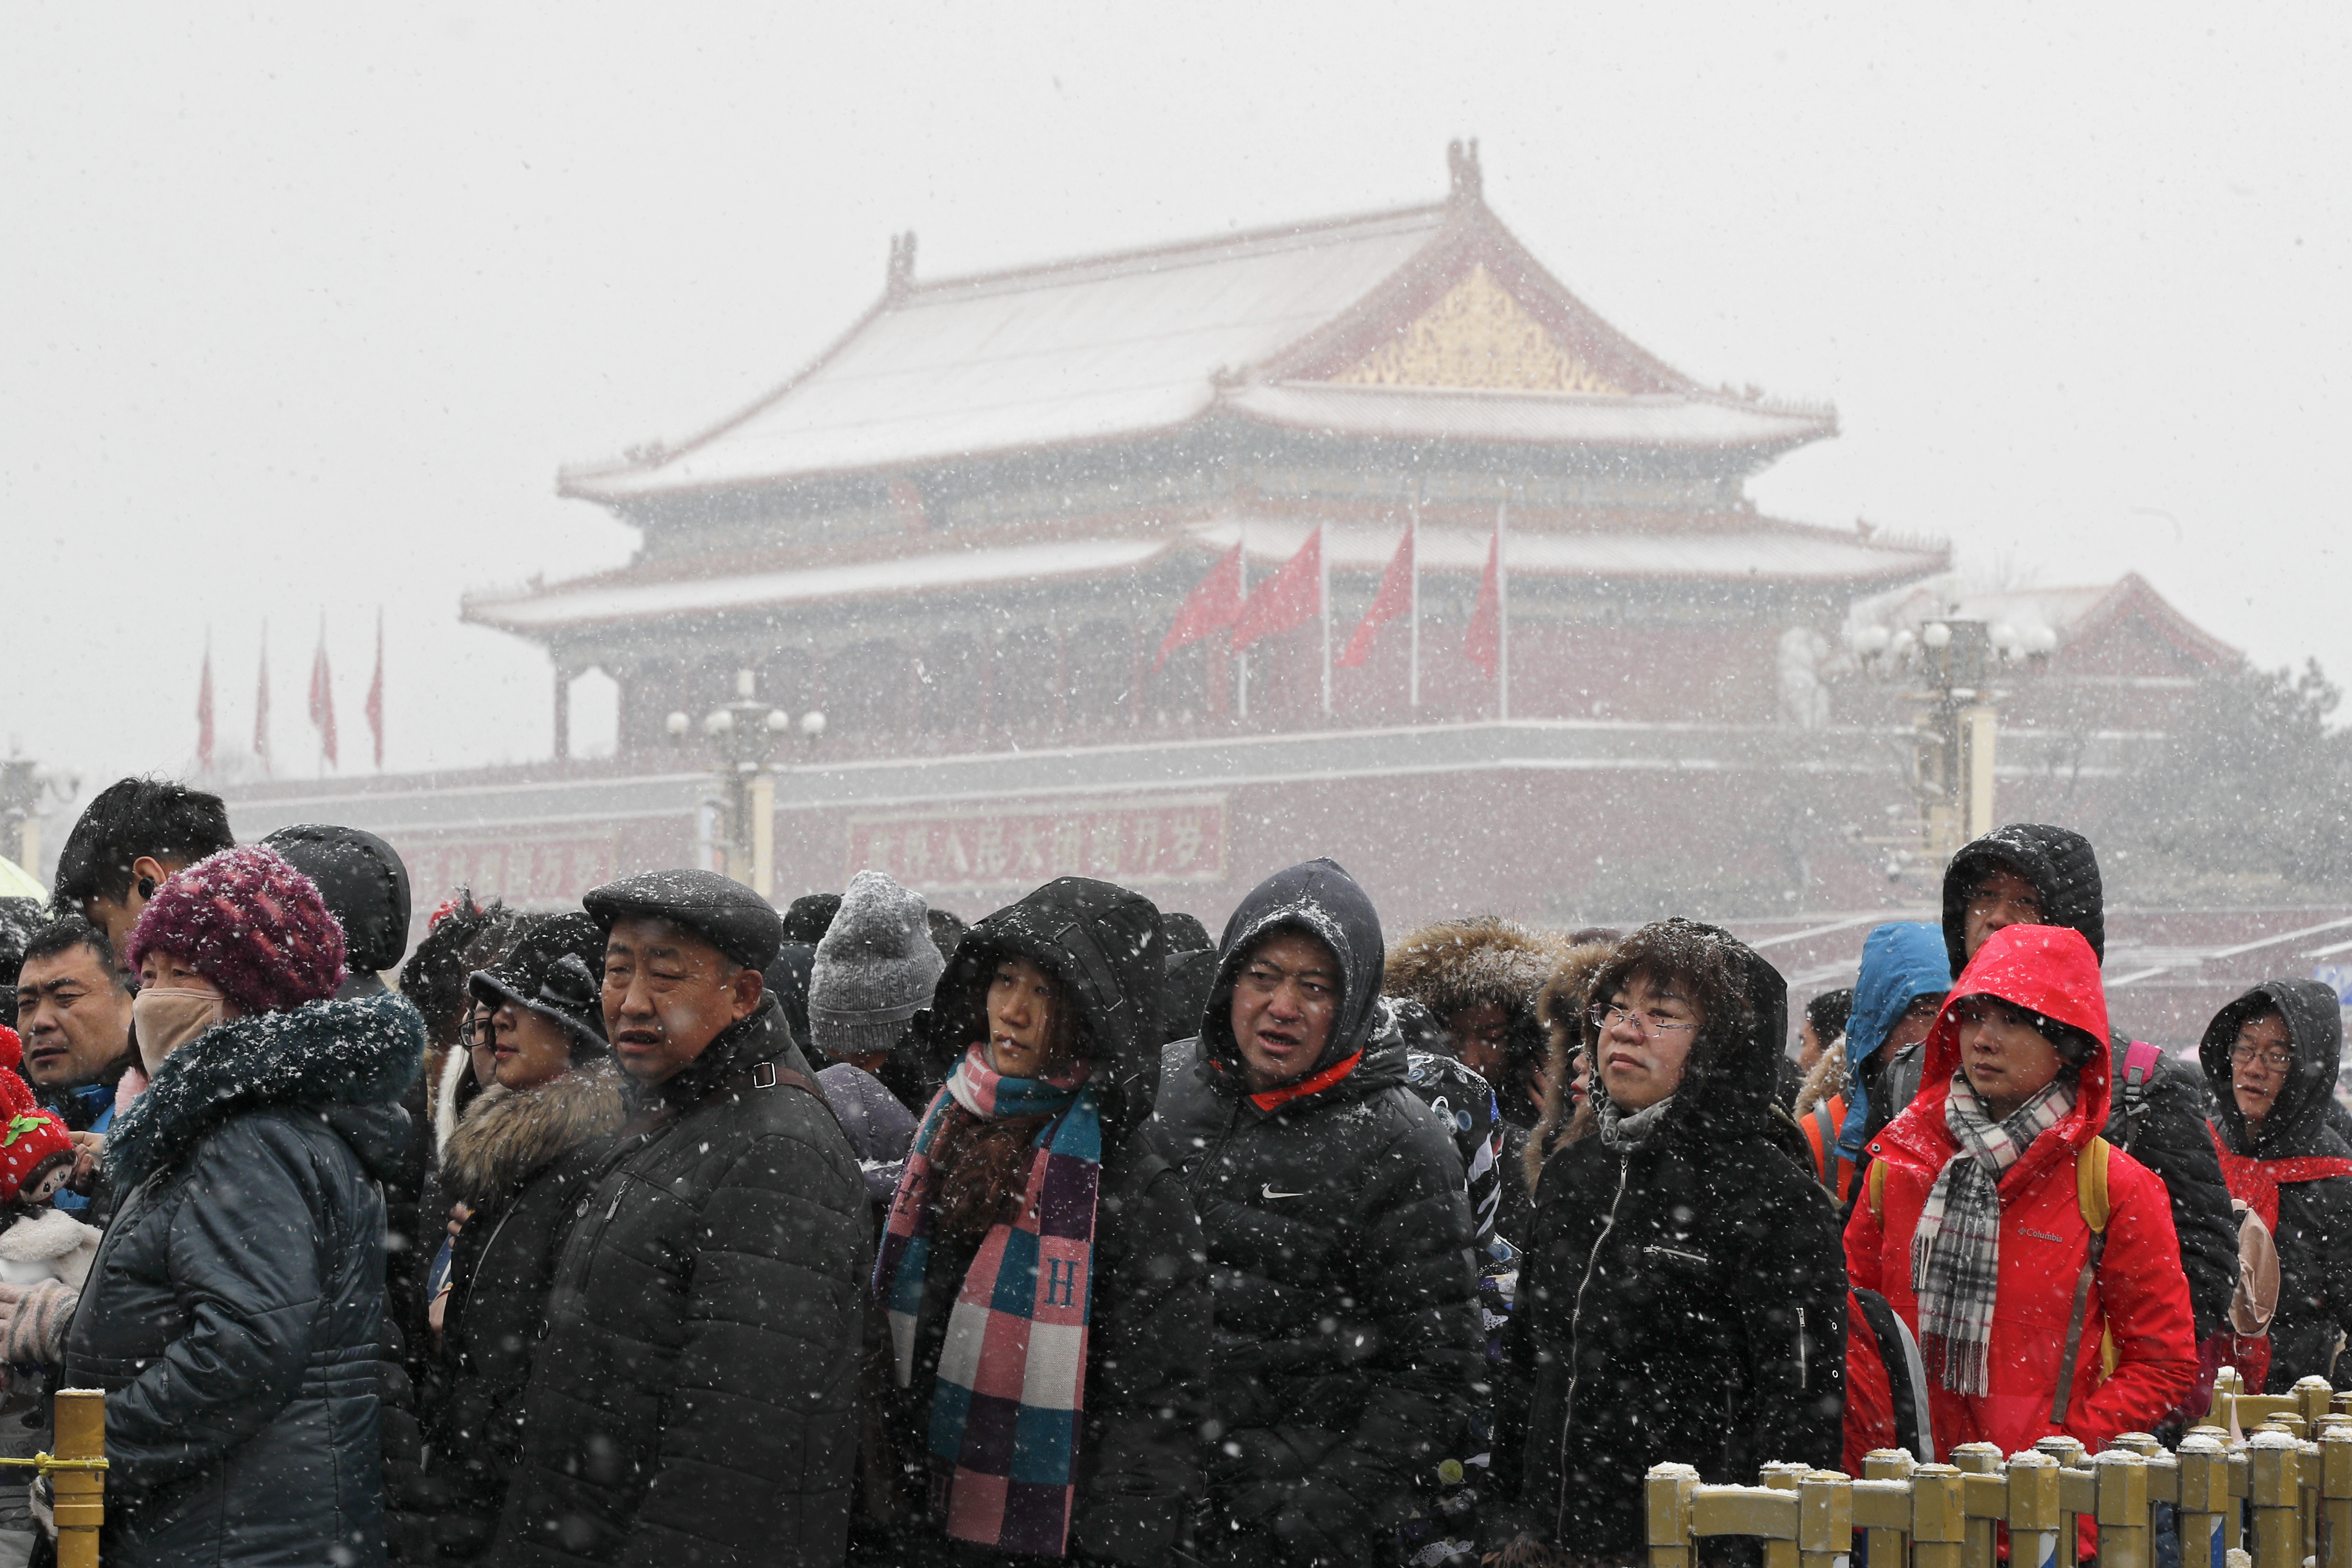 People line-up in the snow to enter the National Museum as Tiananmen Gate are seen at the backdrop in Beijing, Tuesday, Feb. 12, 2019. China's capital is mostly dry in the winter but a storm system brought snow to the city on Tuesday morning. (AP Photo/Andy Wong)